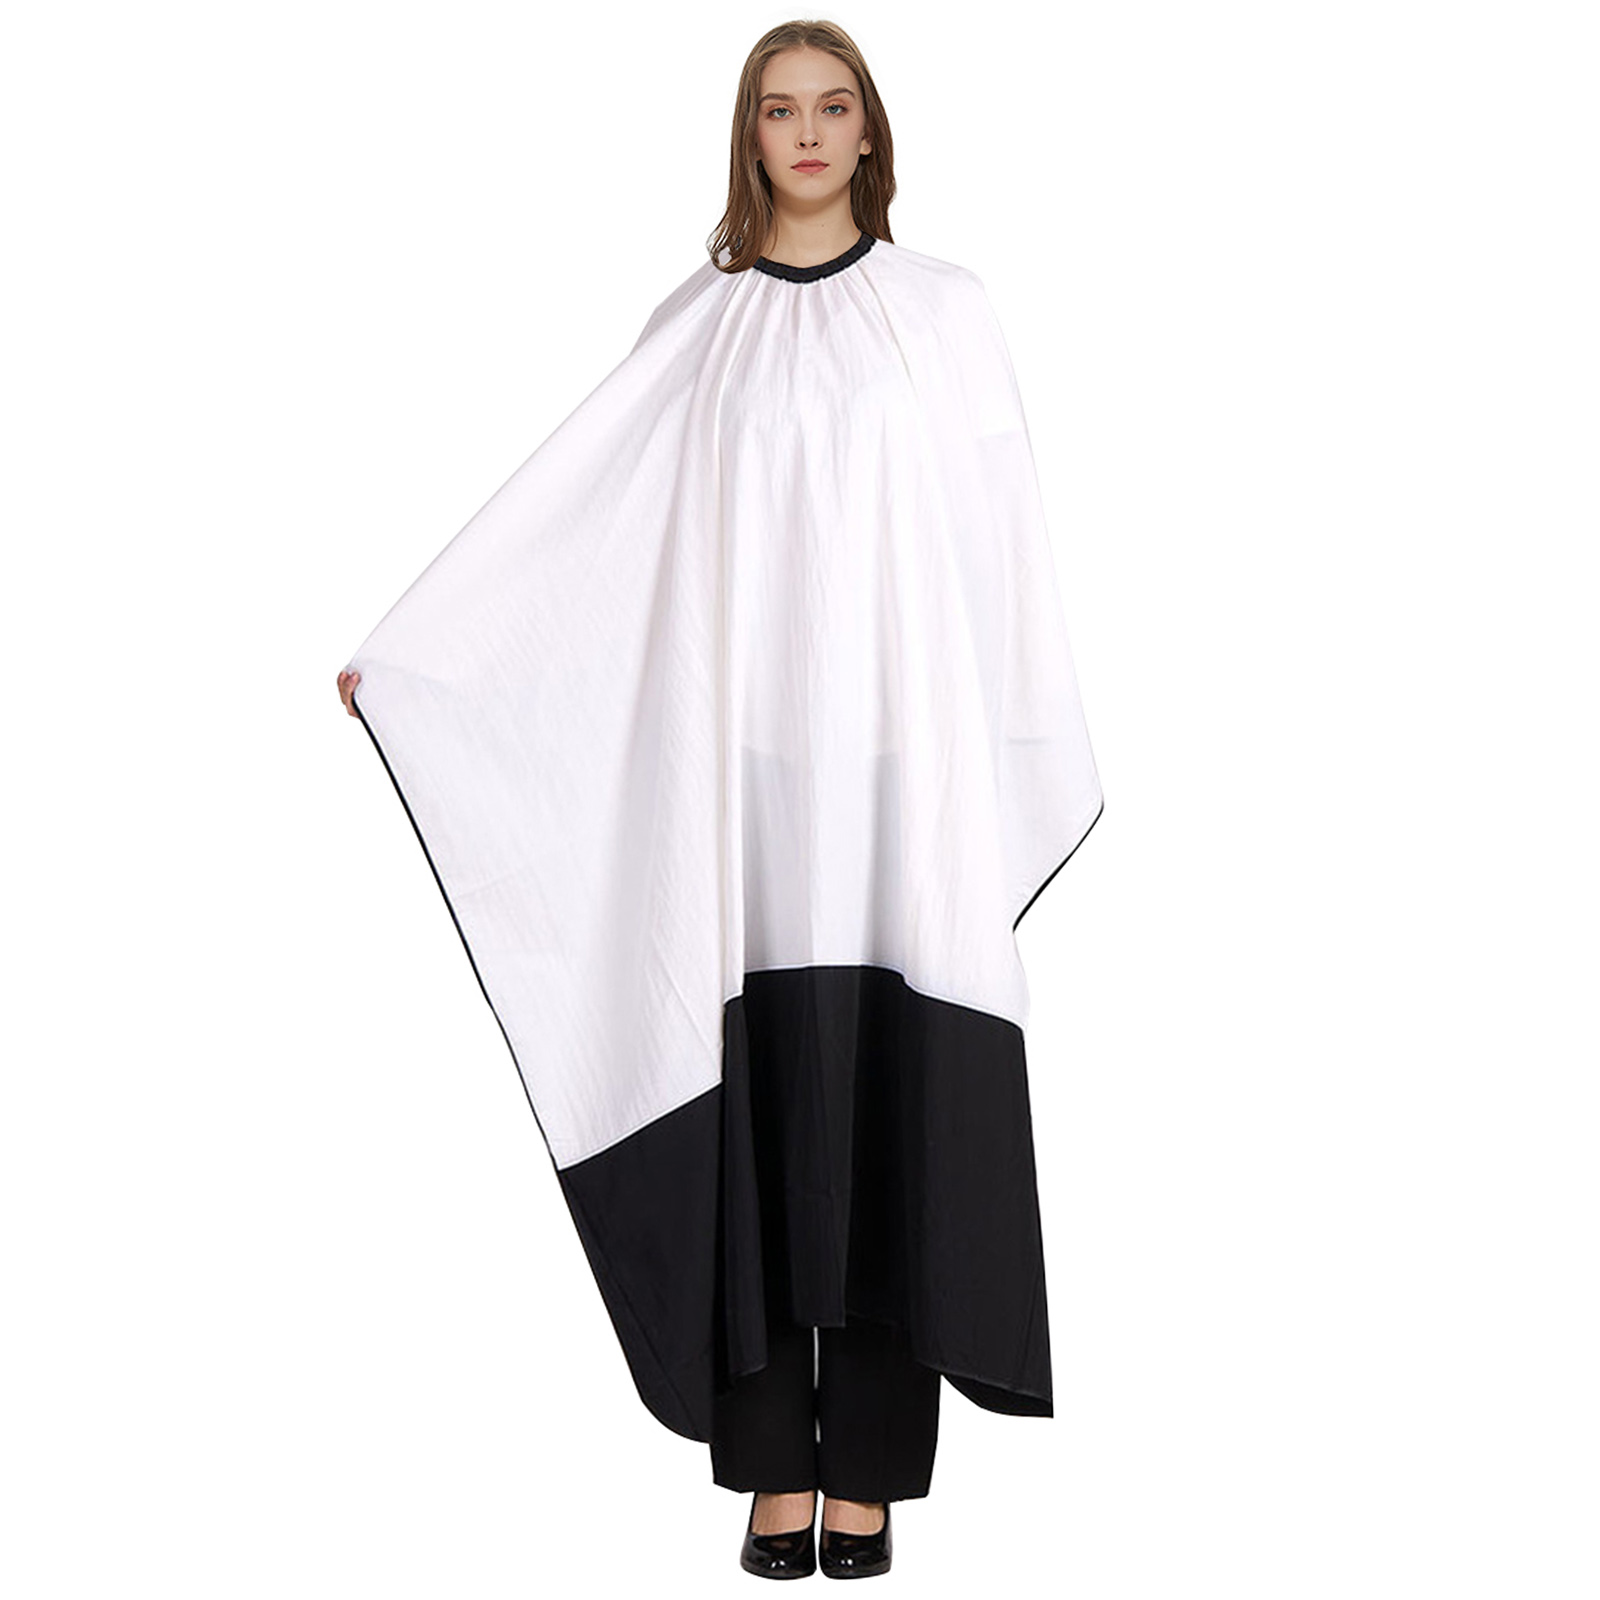 Opentip Opromo Hair Cutting Cape with Adjustable Clasp Closure